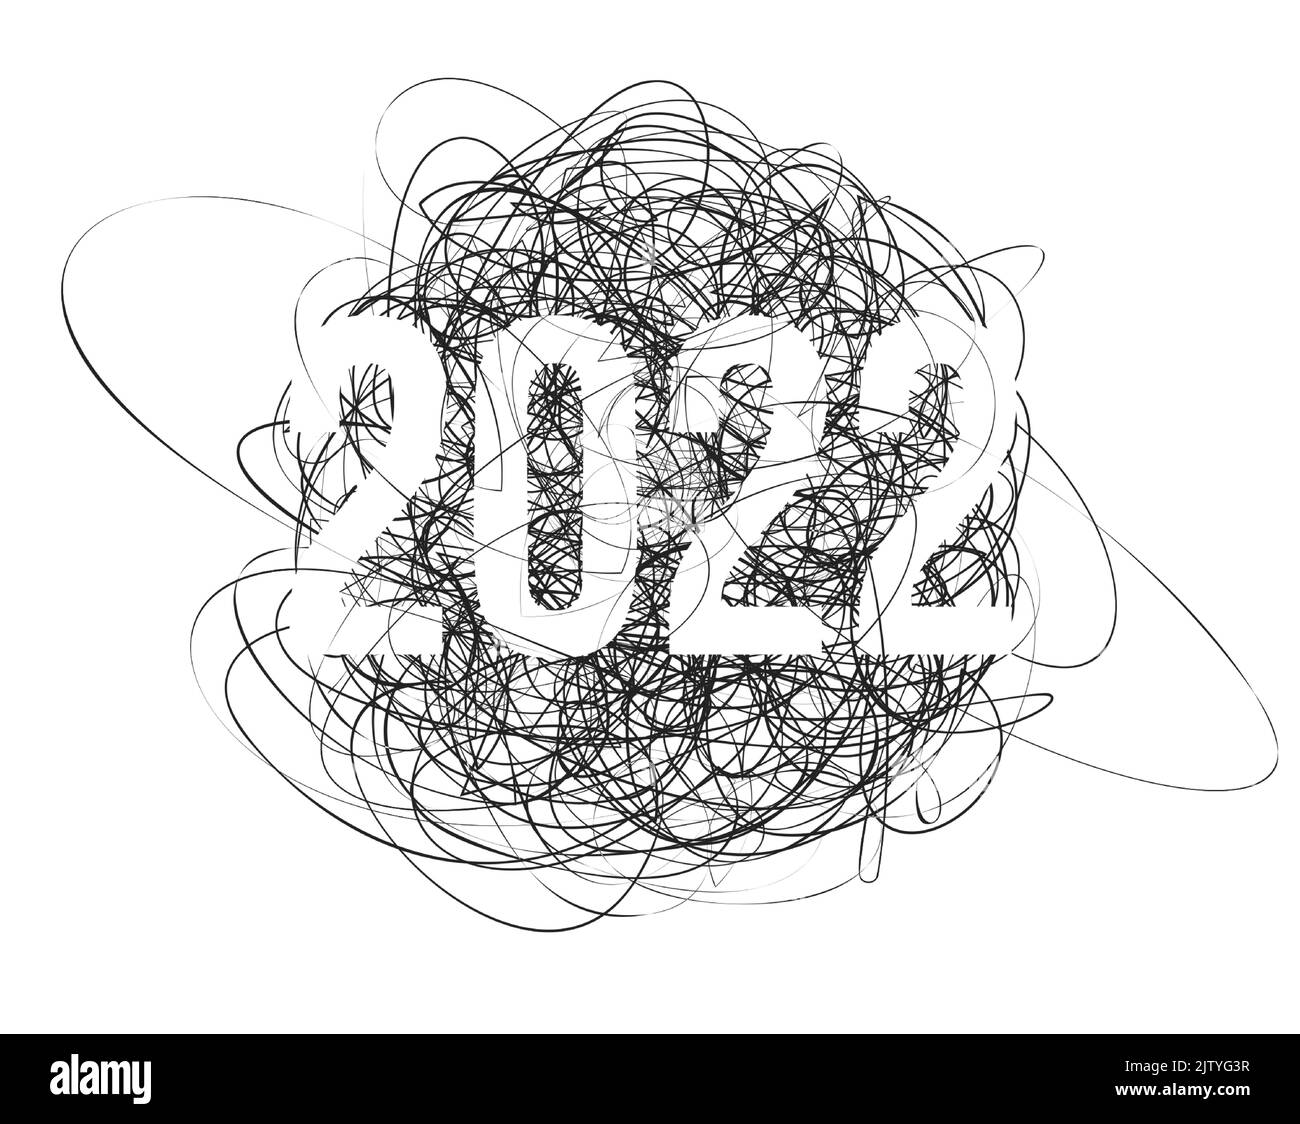 2023 numbers on chaotic lines background. Happy New Year event poster, greeting card cover, 2023 calendar design, invitation to celebrate New Year and Stock Vector